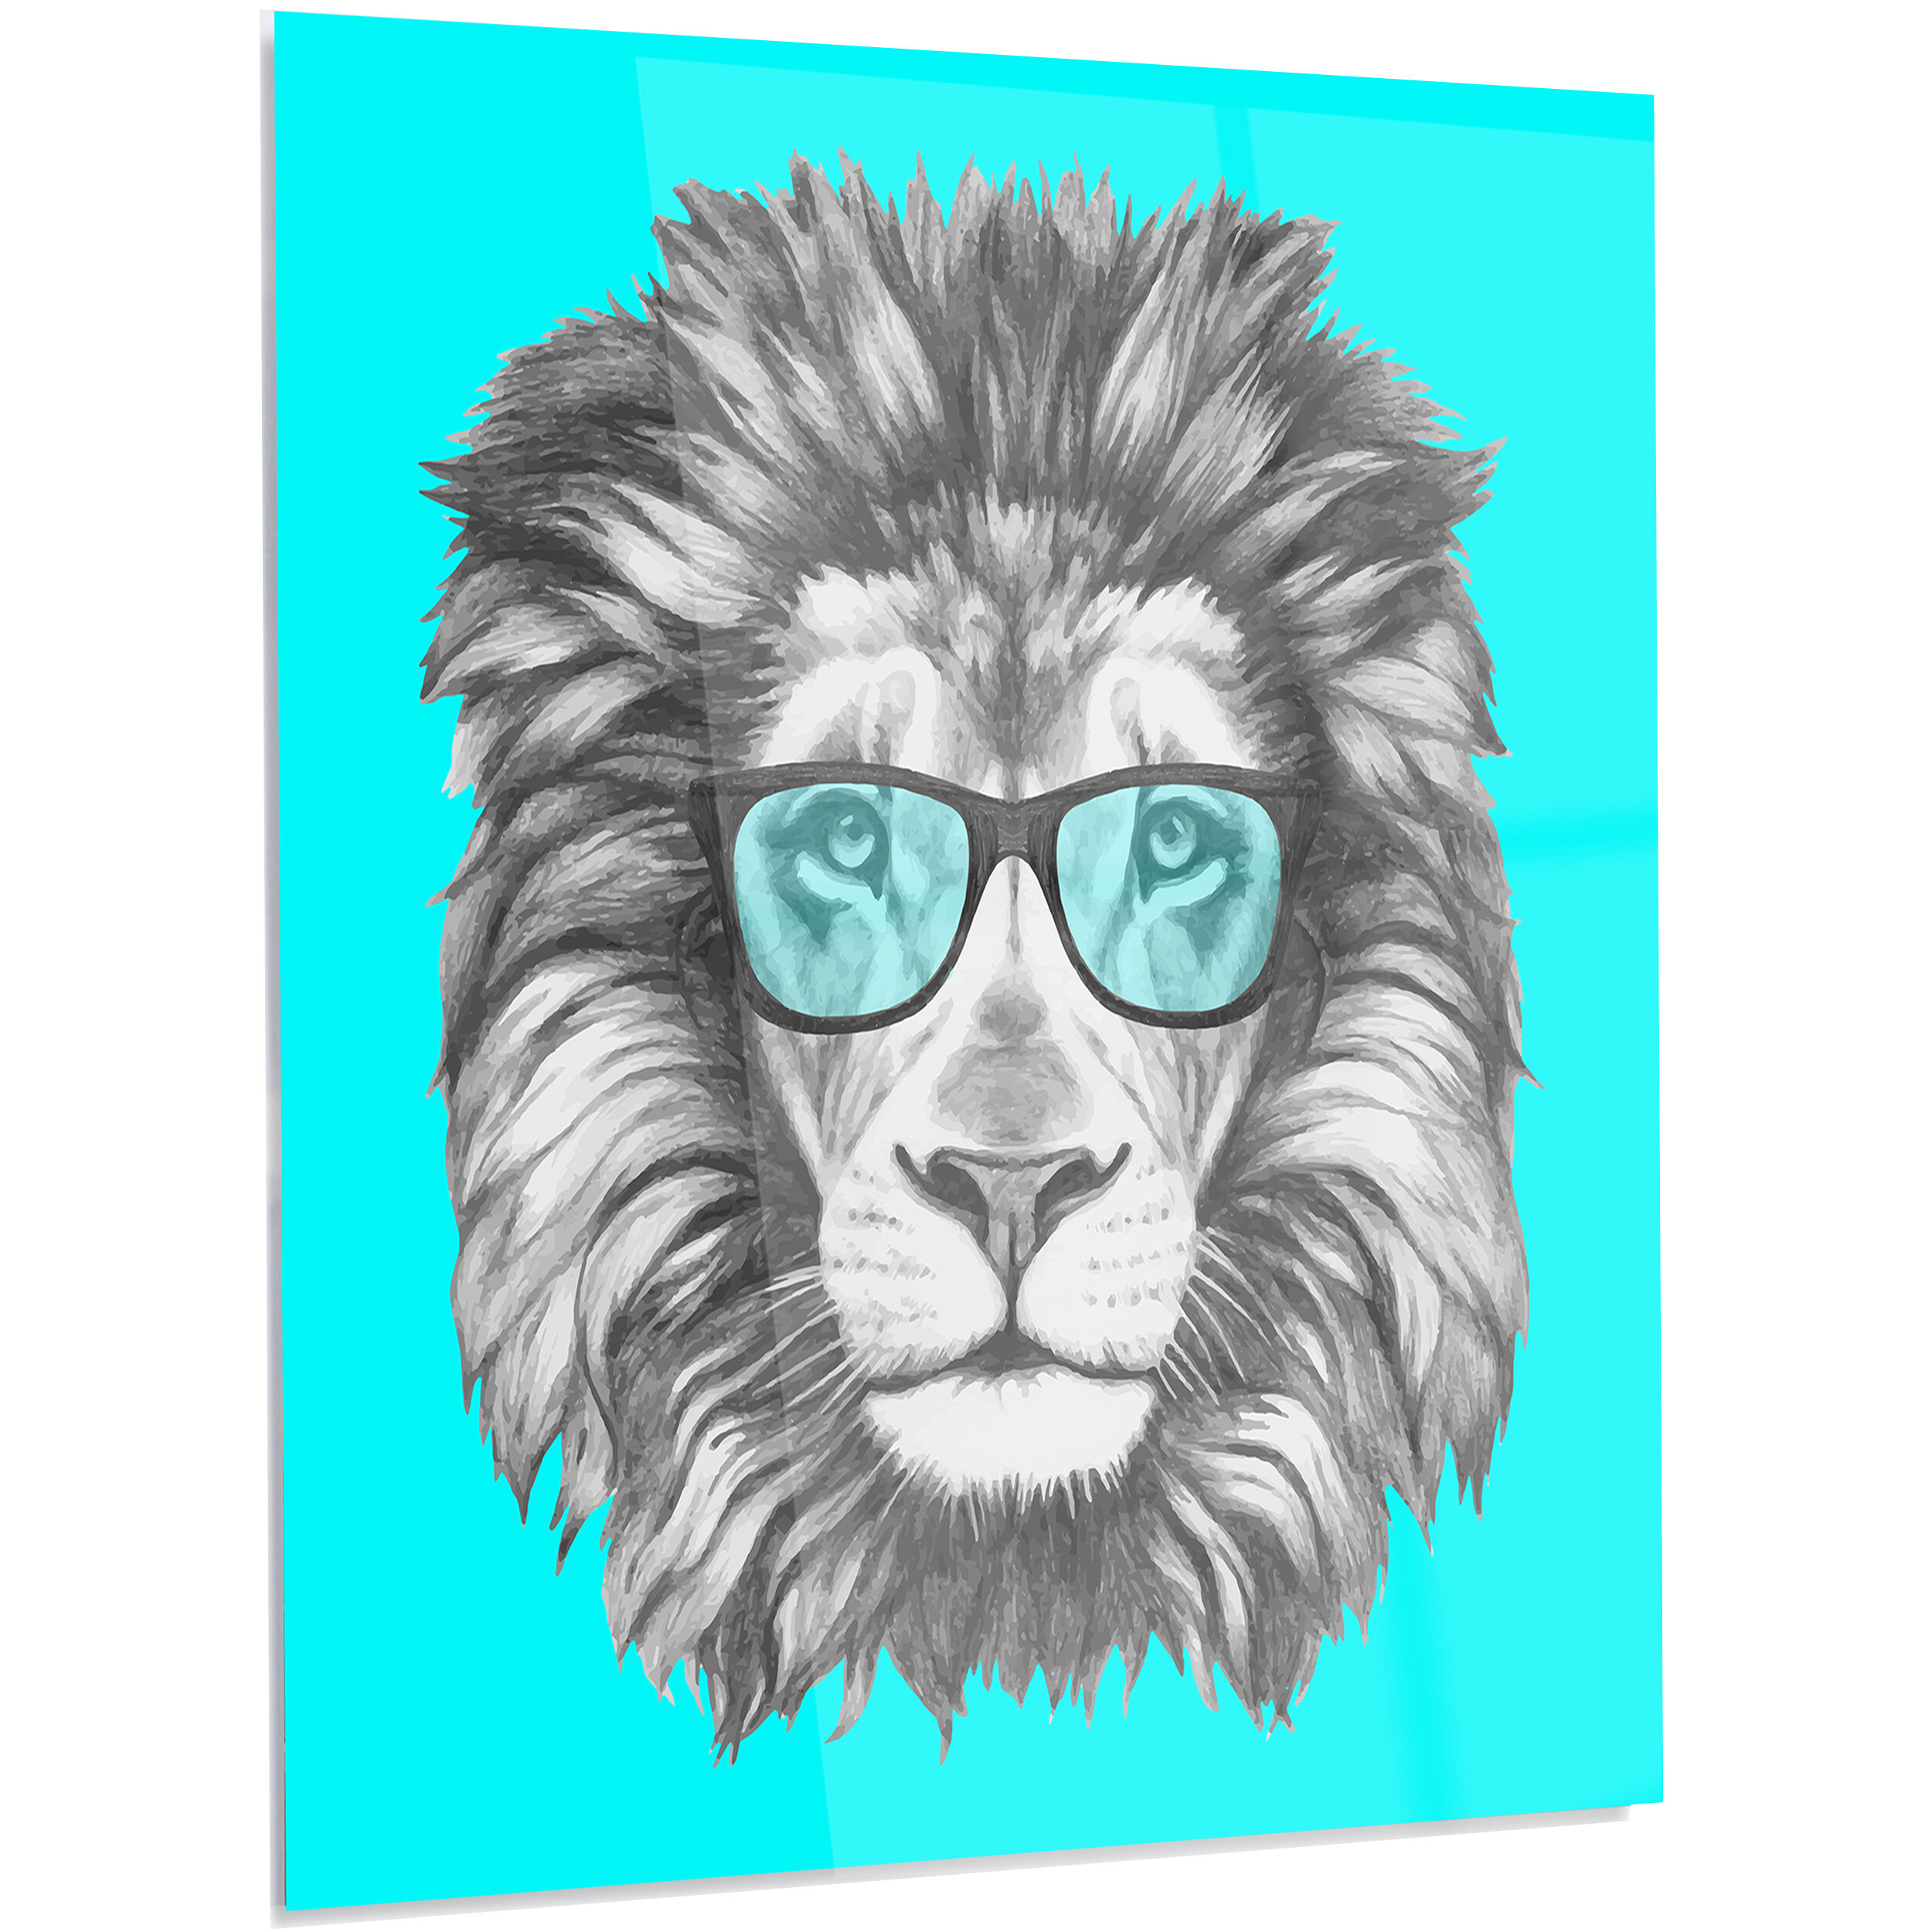 Ebern Designs Funny Lion With Blue Glasses - Unframed Graphic Art on Metal  | Wayfair